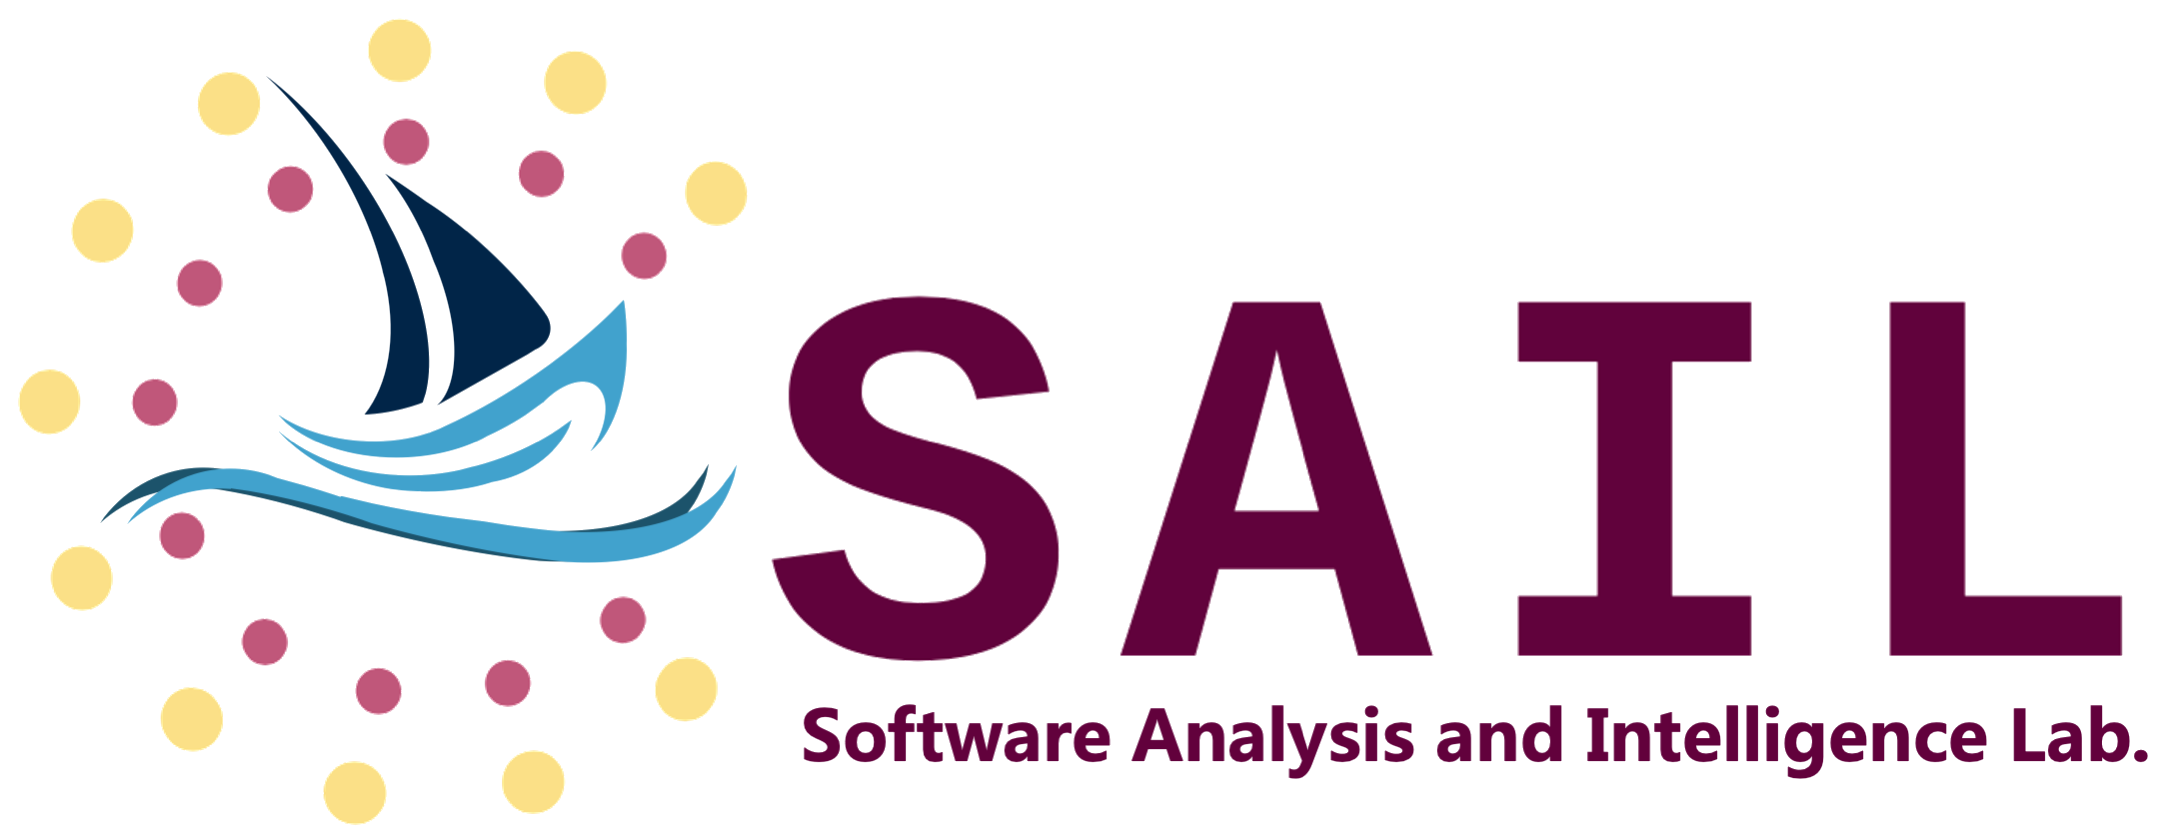 Software Analysis and Intelligence Lab.